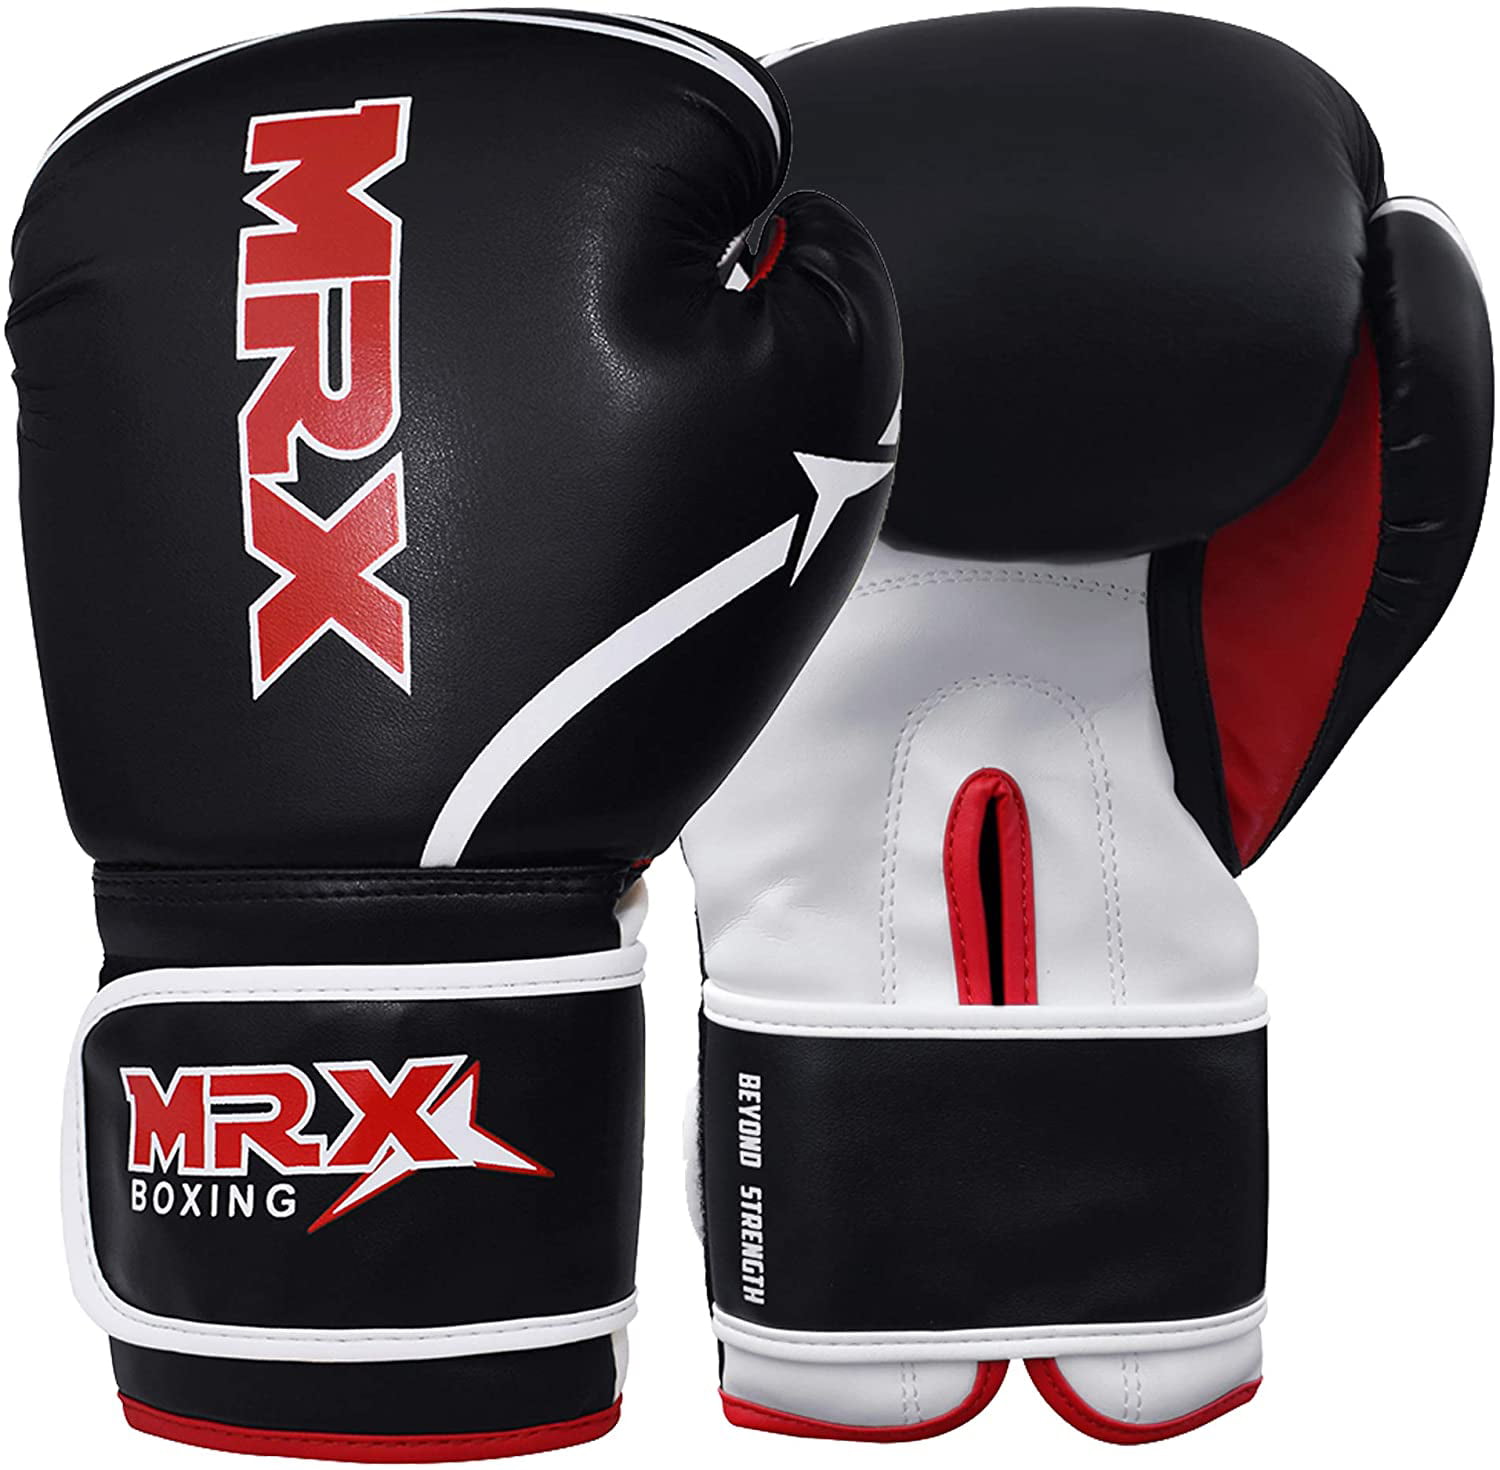 RDX Boxing Bag Mitts Gloves Practice Sparring Fitness MMA Training Punch Kick 